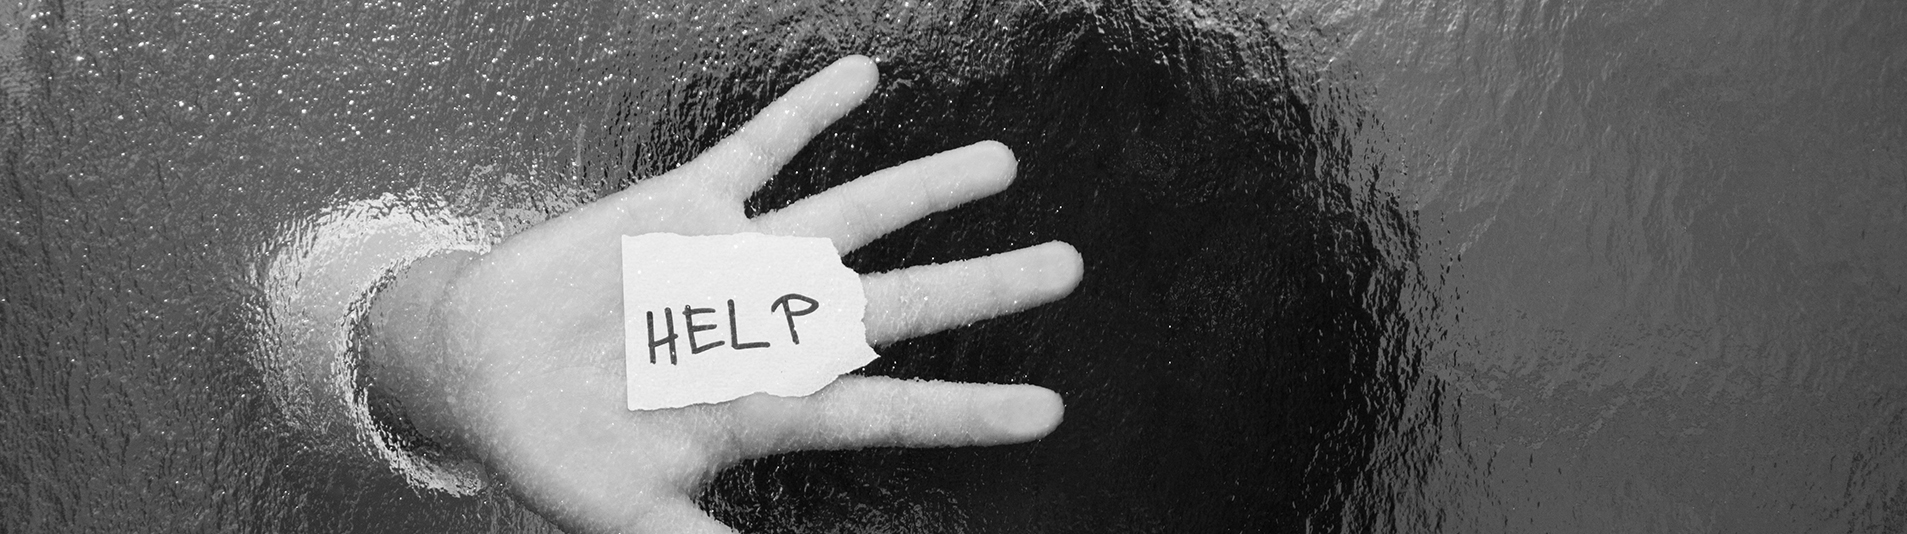 This is a picture of someone's hand with a paper written on it "HELP"